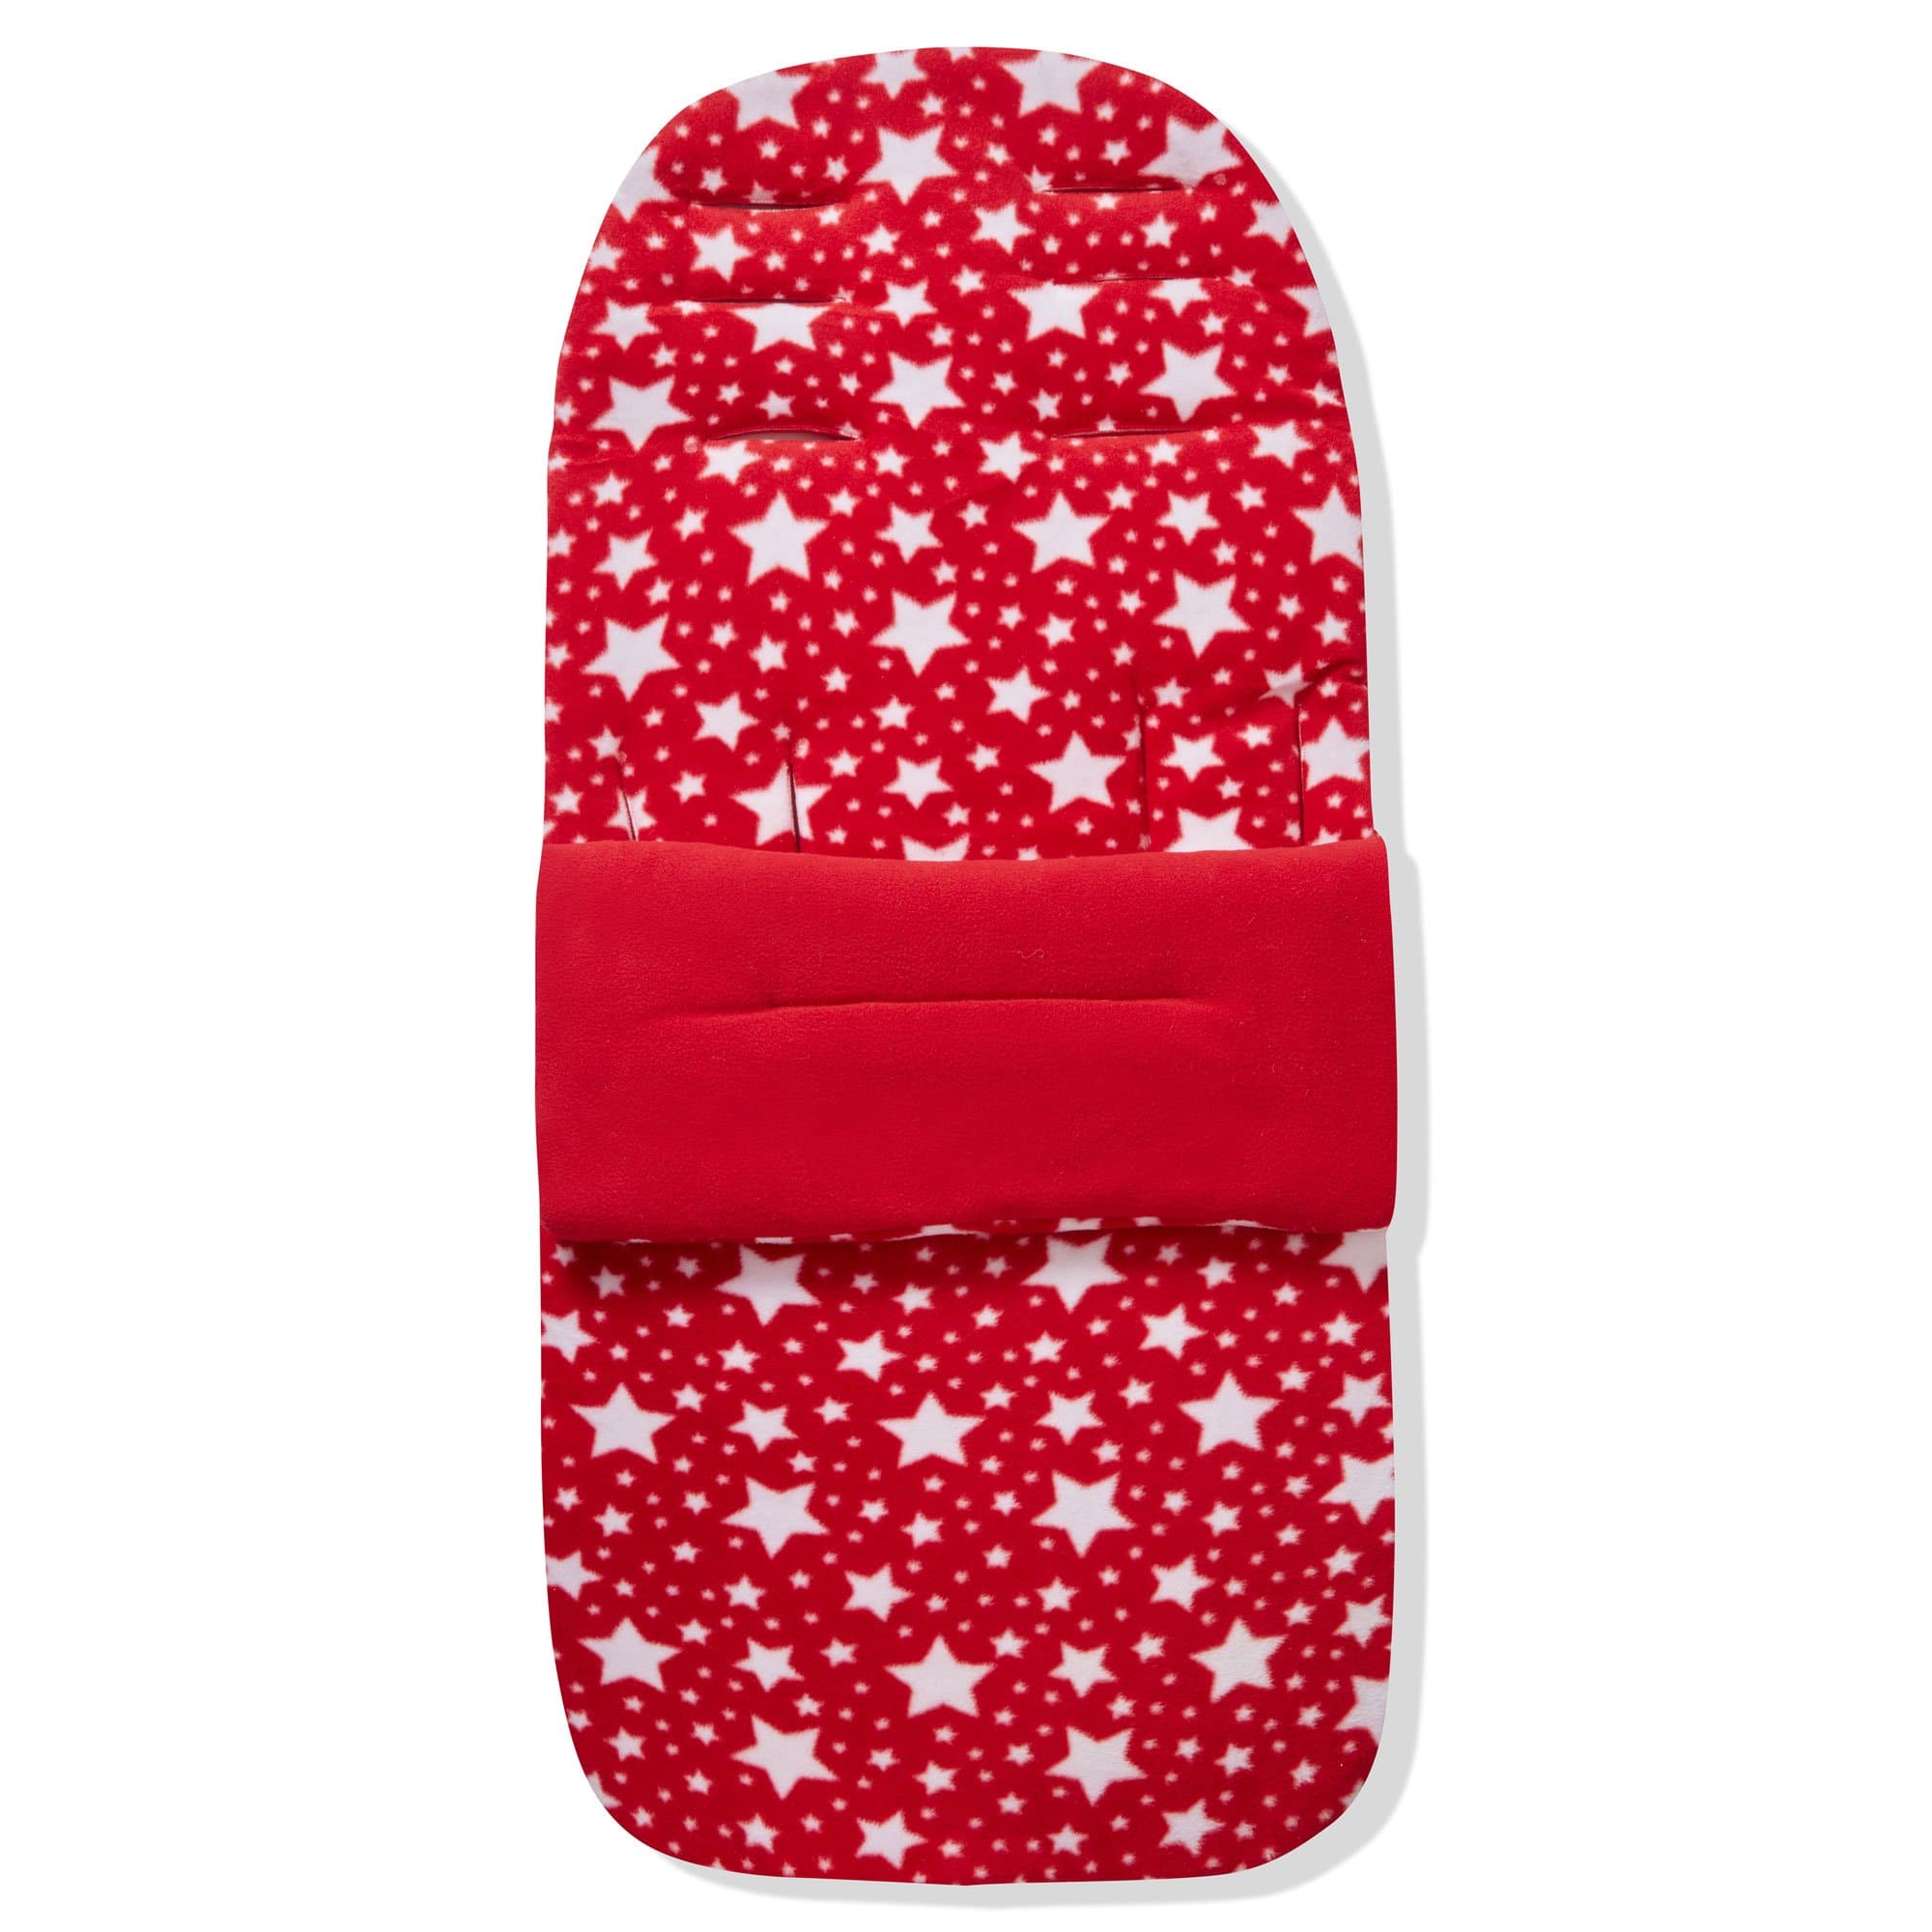 Fleece Footmuff / Cosy Toes Compatible with Ickle Bubba - Red Star / Fits All Models | For Your Little One